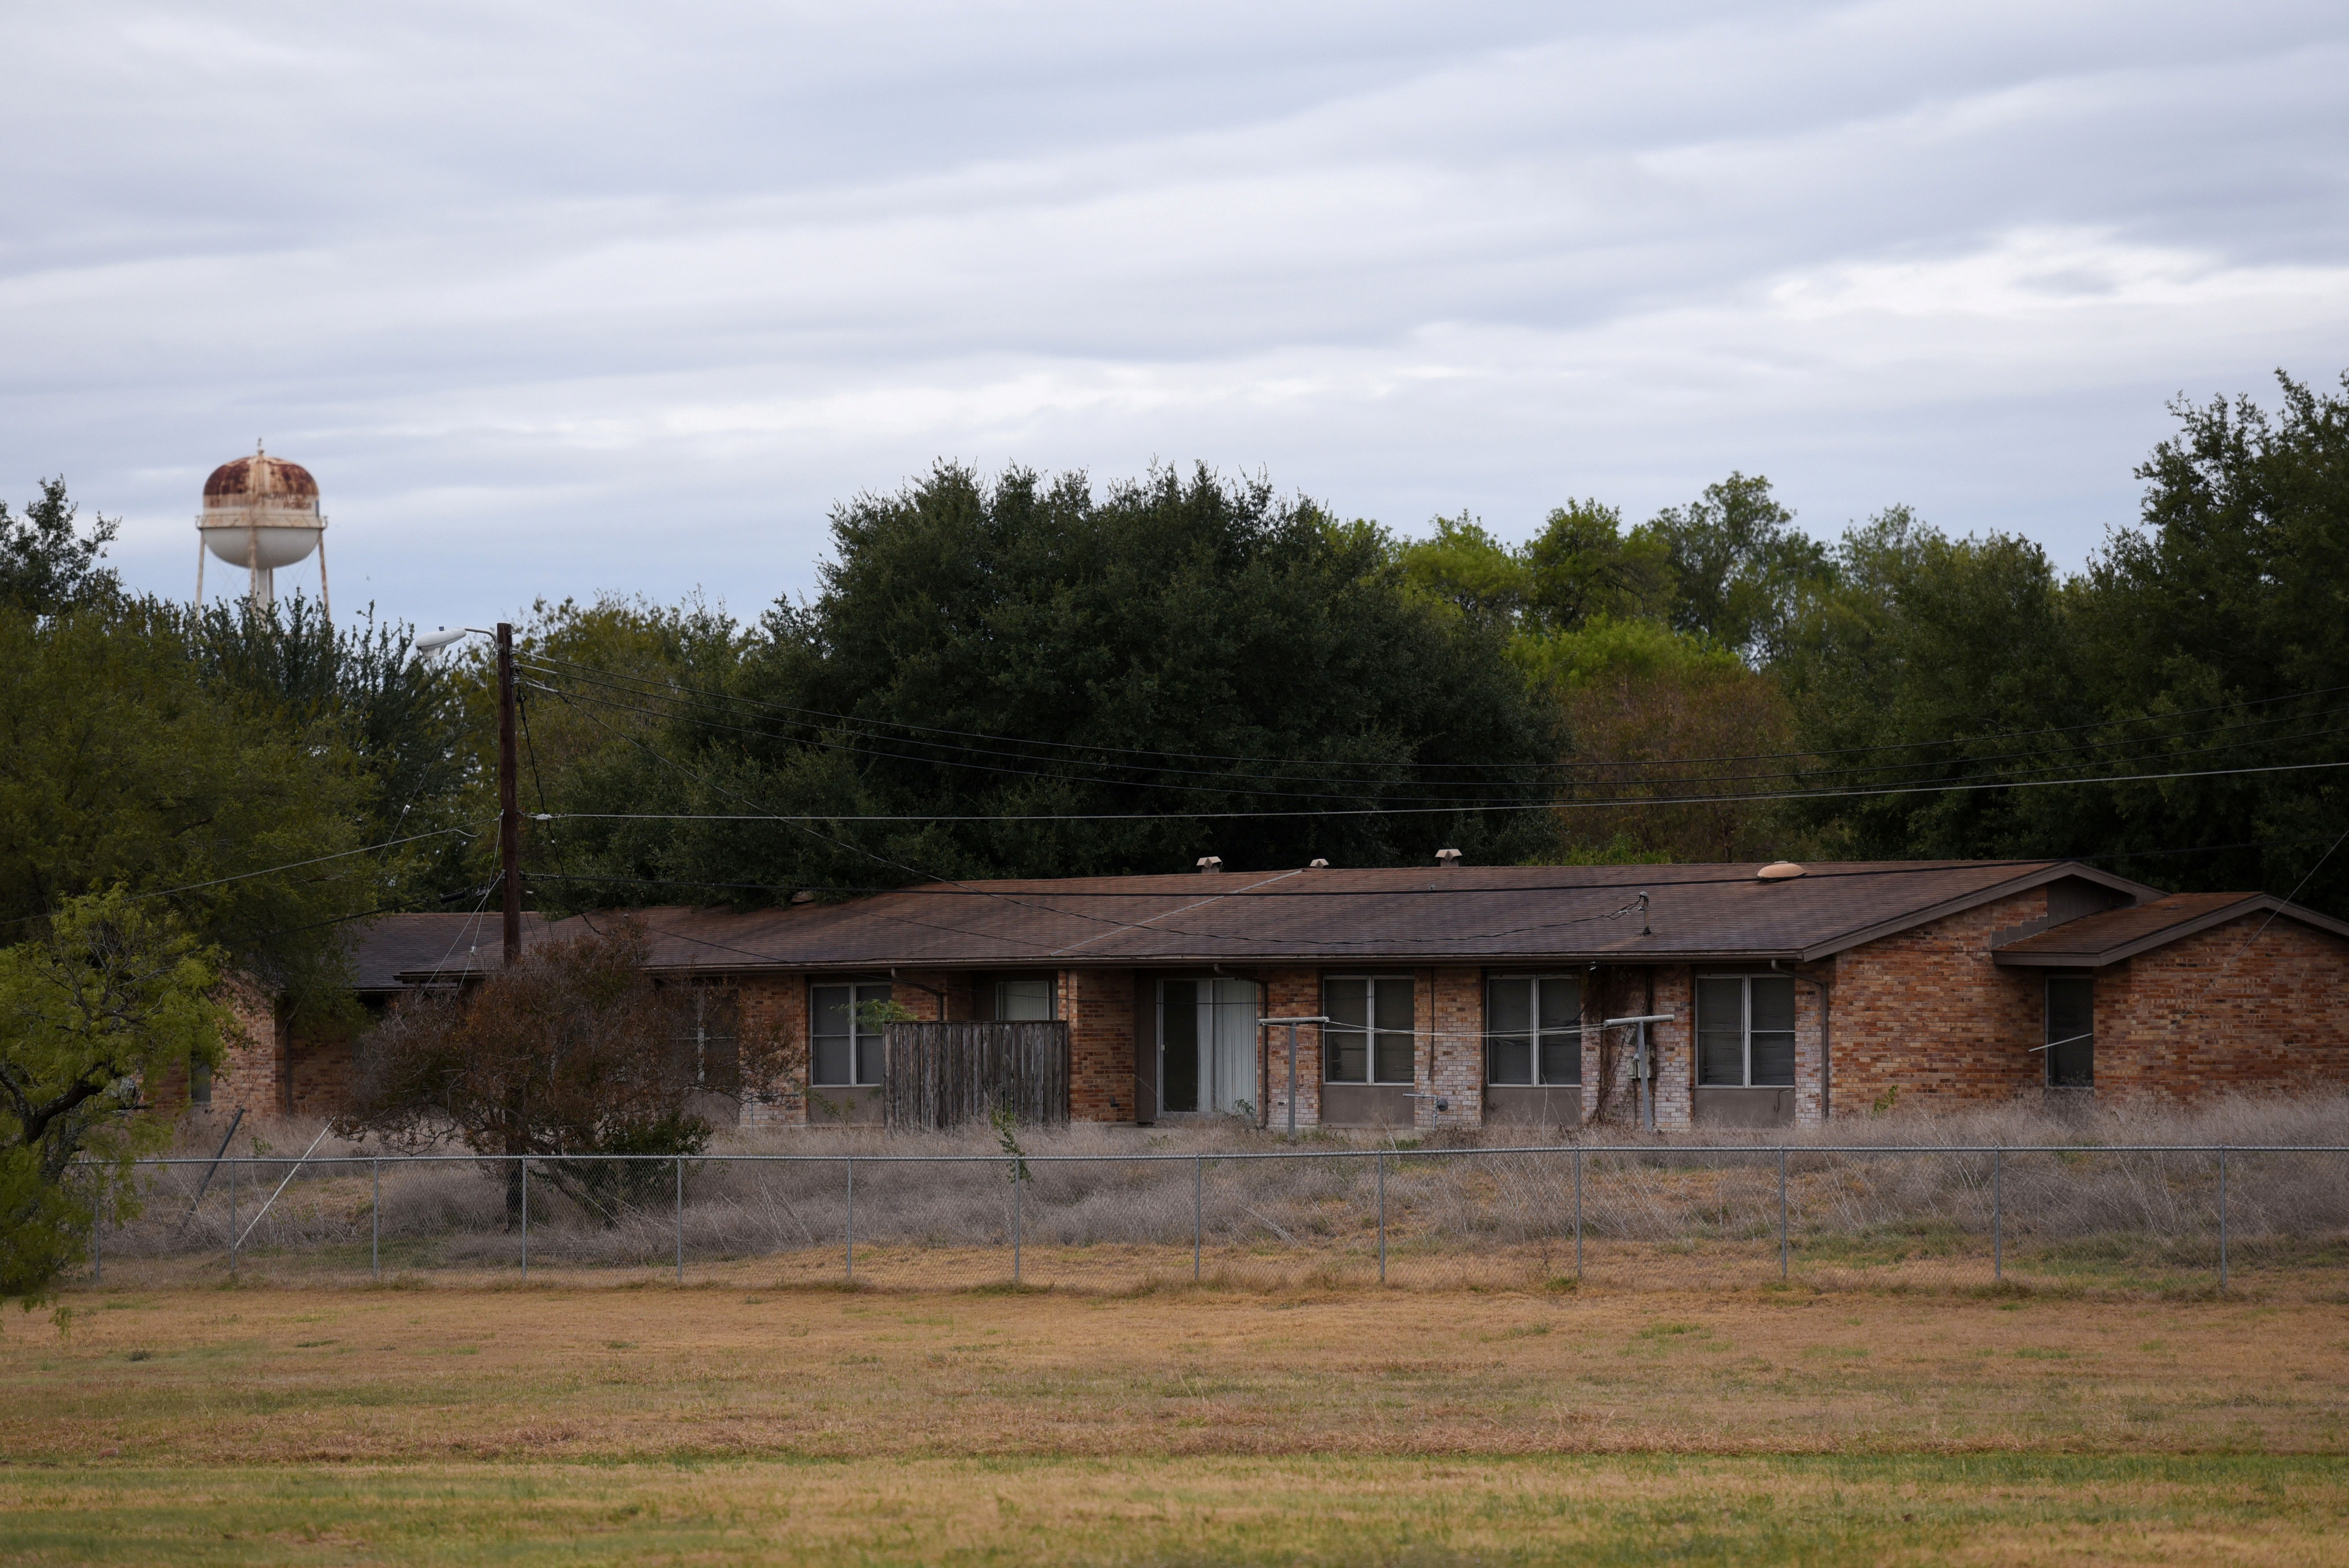 Vacant homes are seen at Lackland Air Force Base in San Antonio